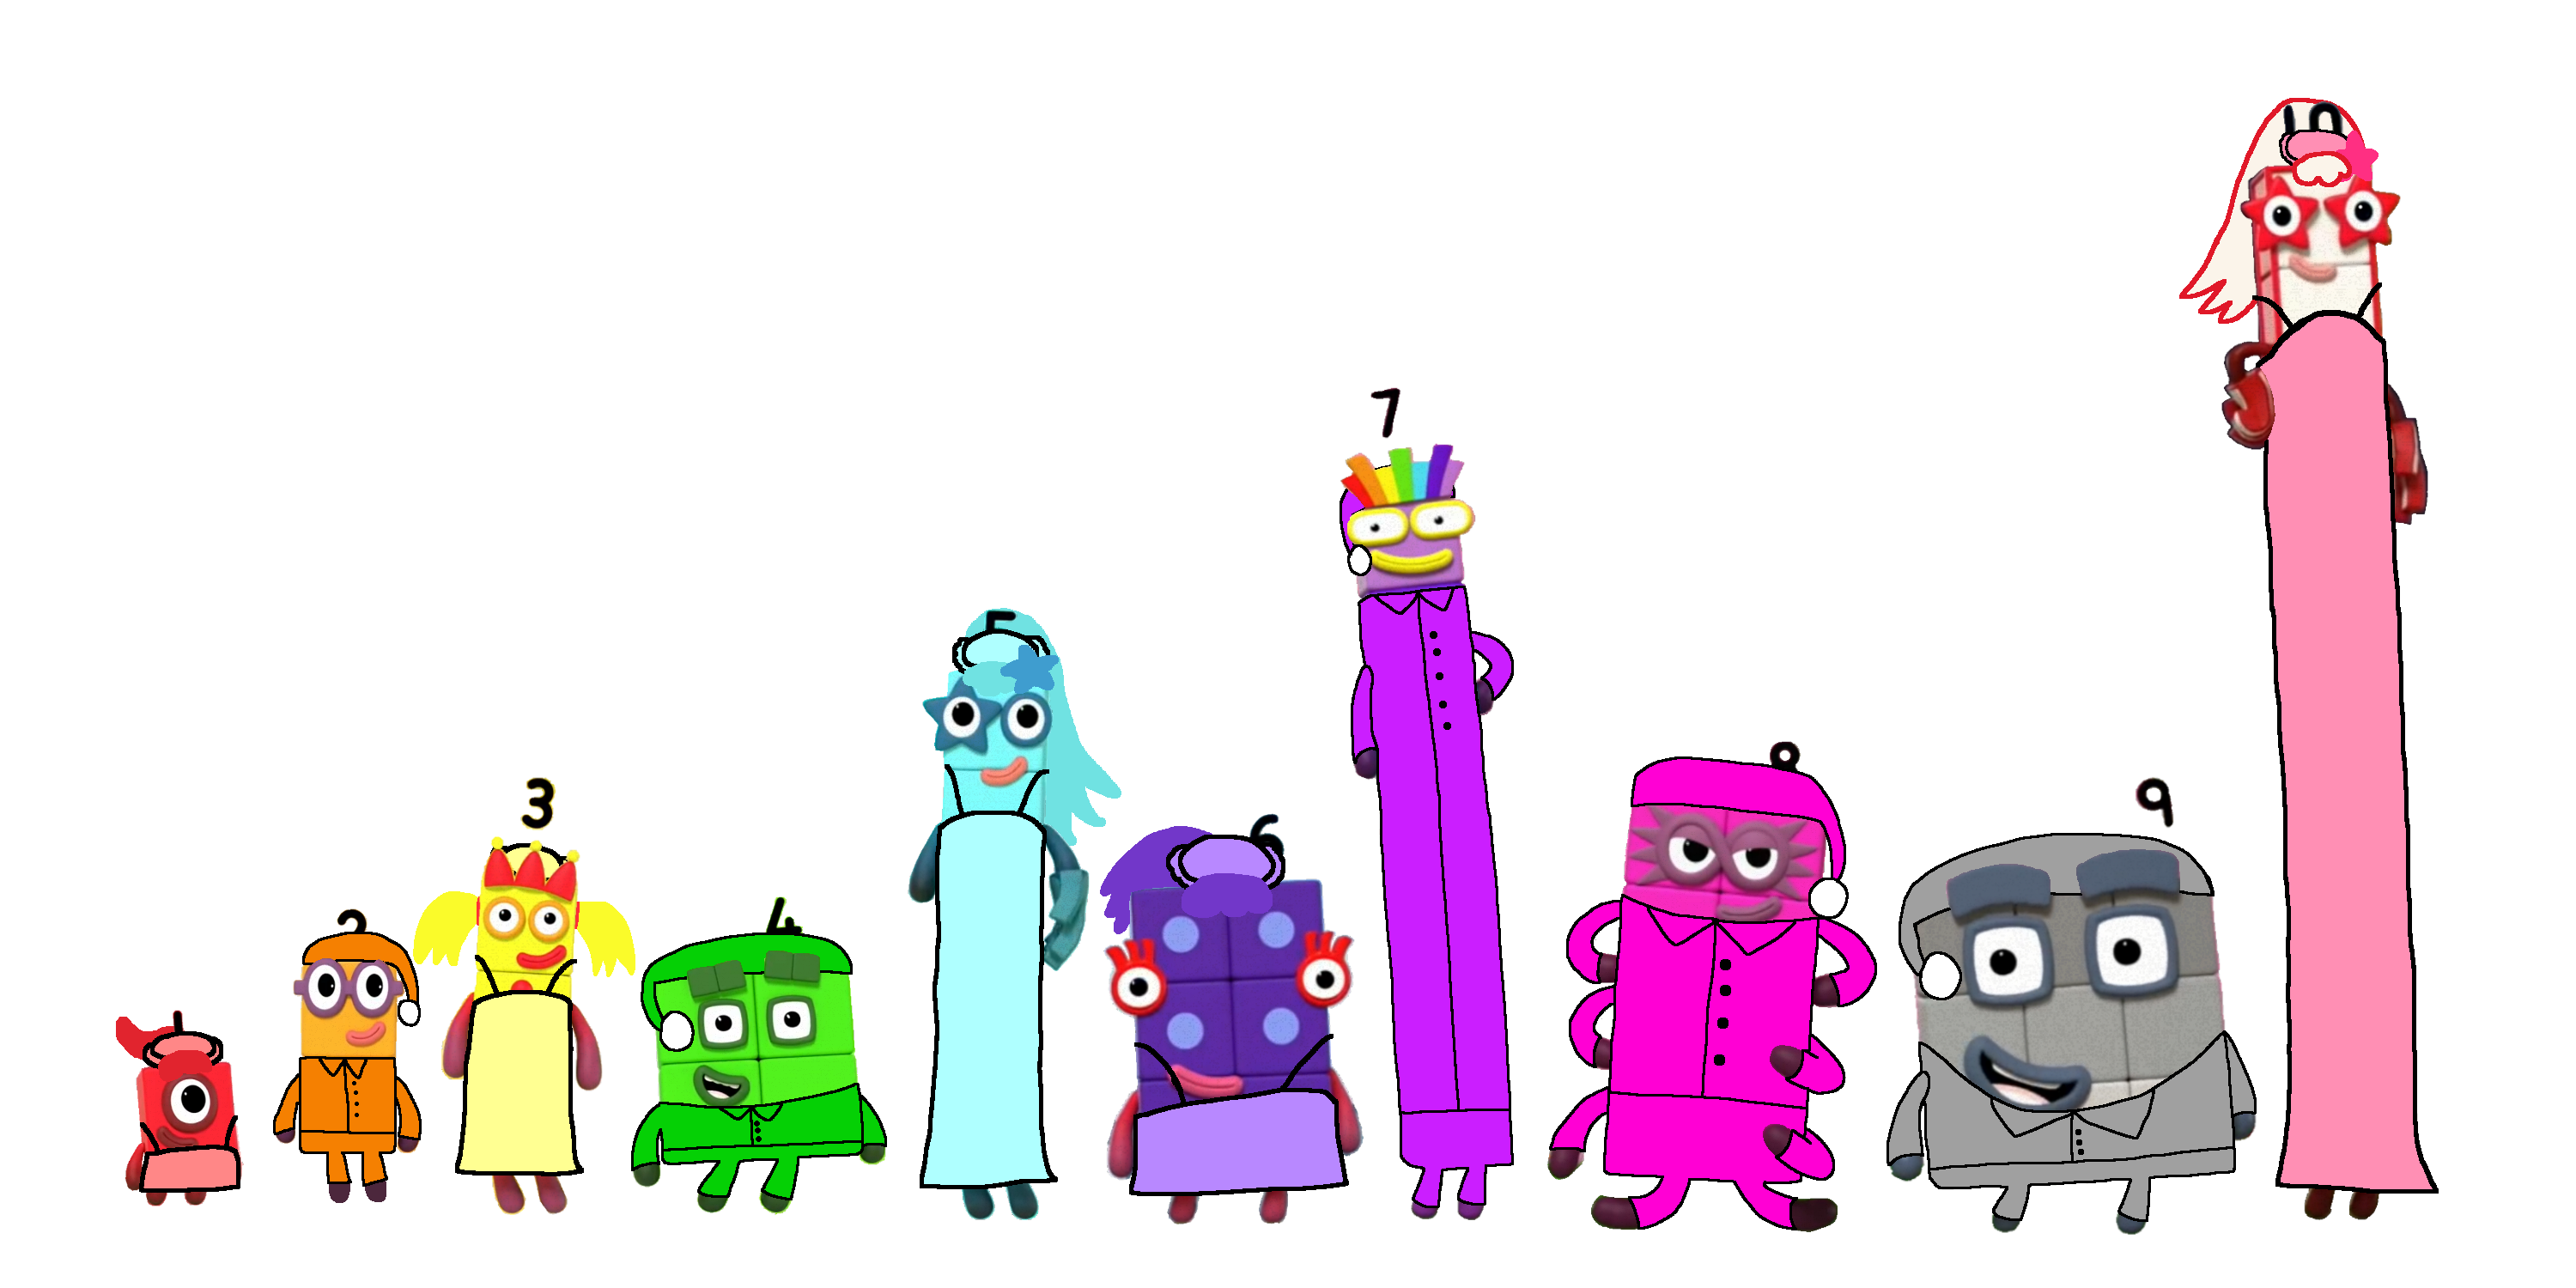 Numberblocks 1 10 In Their Pajamas By Alexiscurry On Deviantart